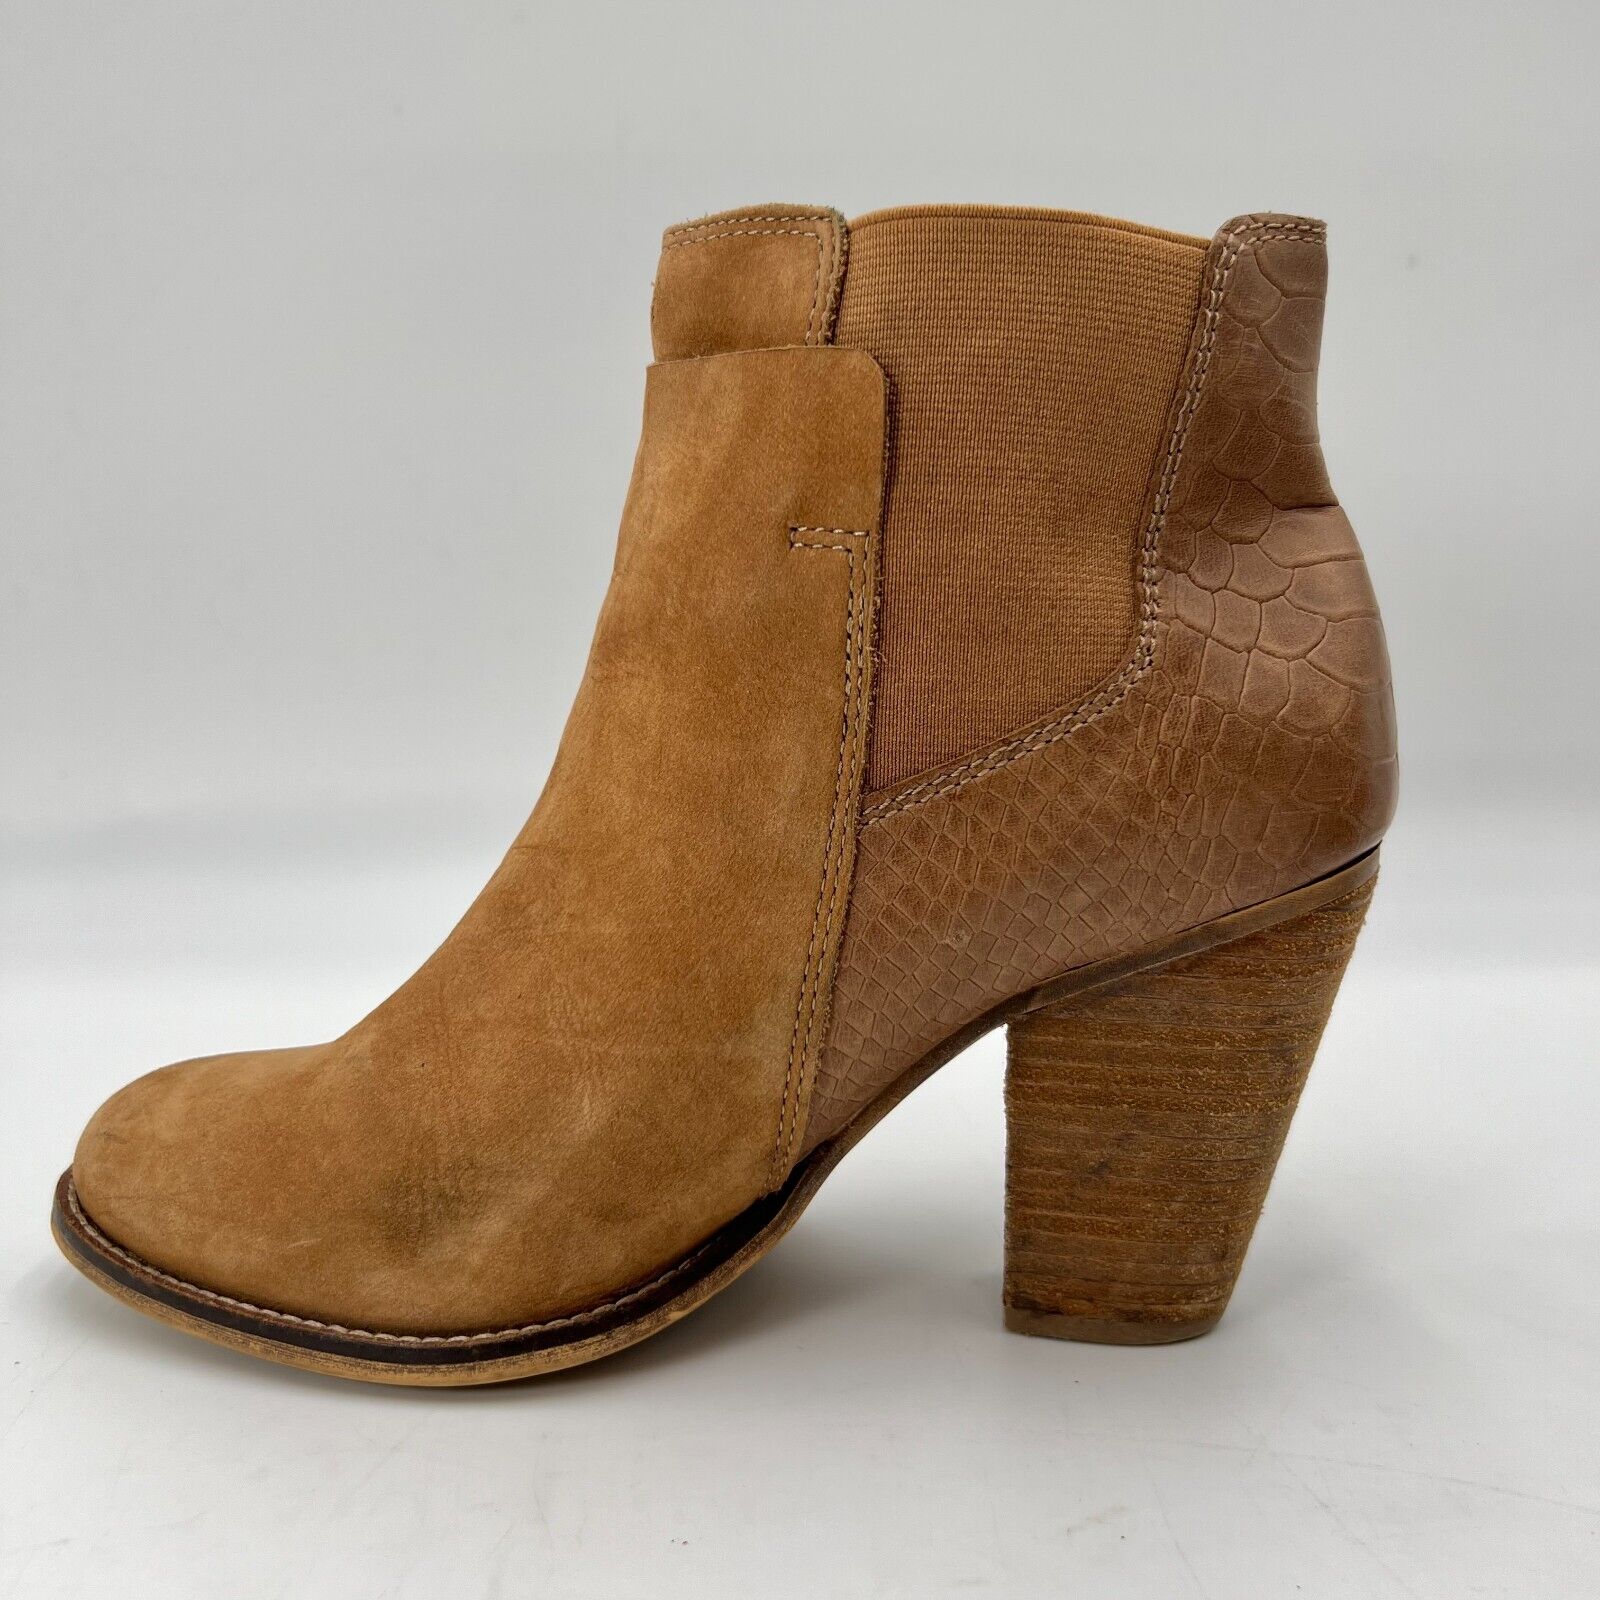 Aldo Ankle Boots Tan Chic 3” Heel Chelsea Western Style Leather Womens Size 8